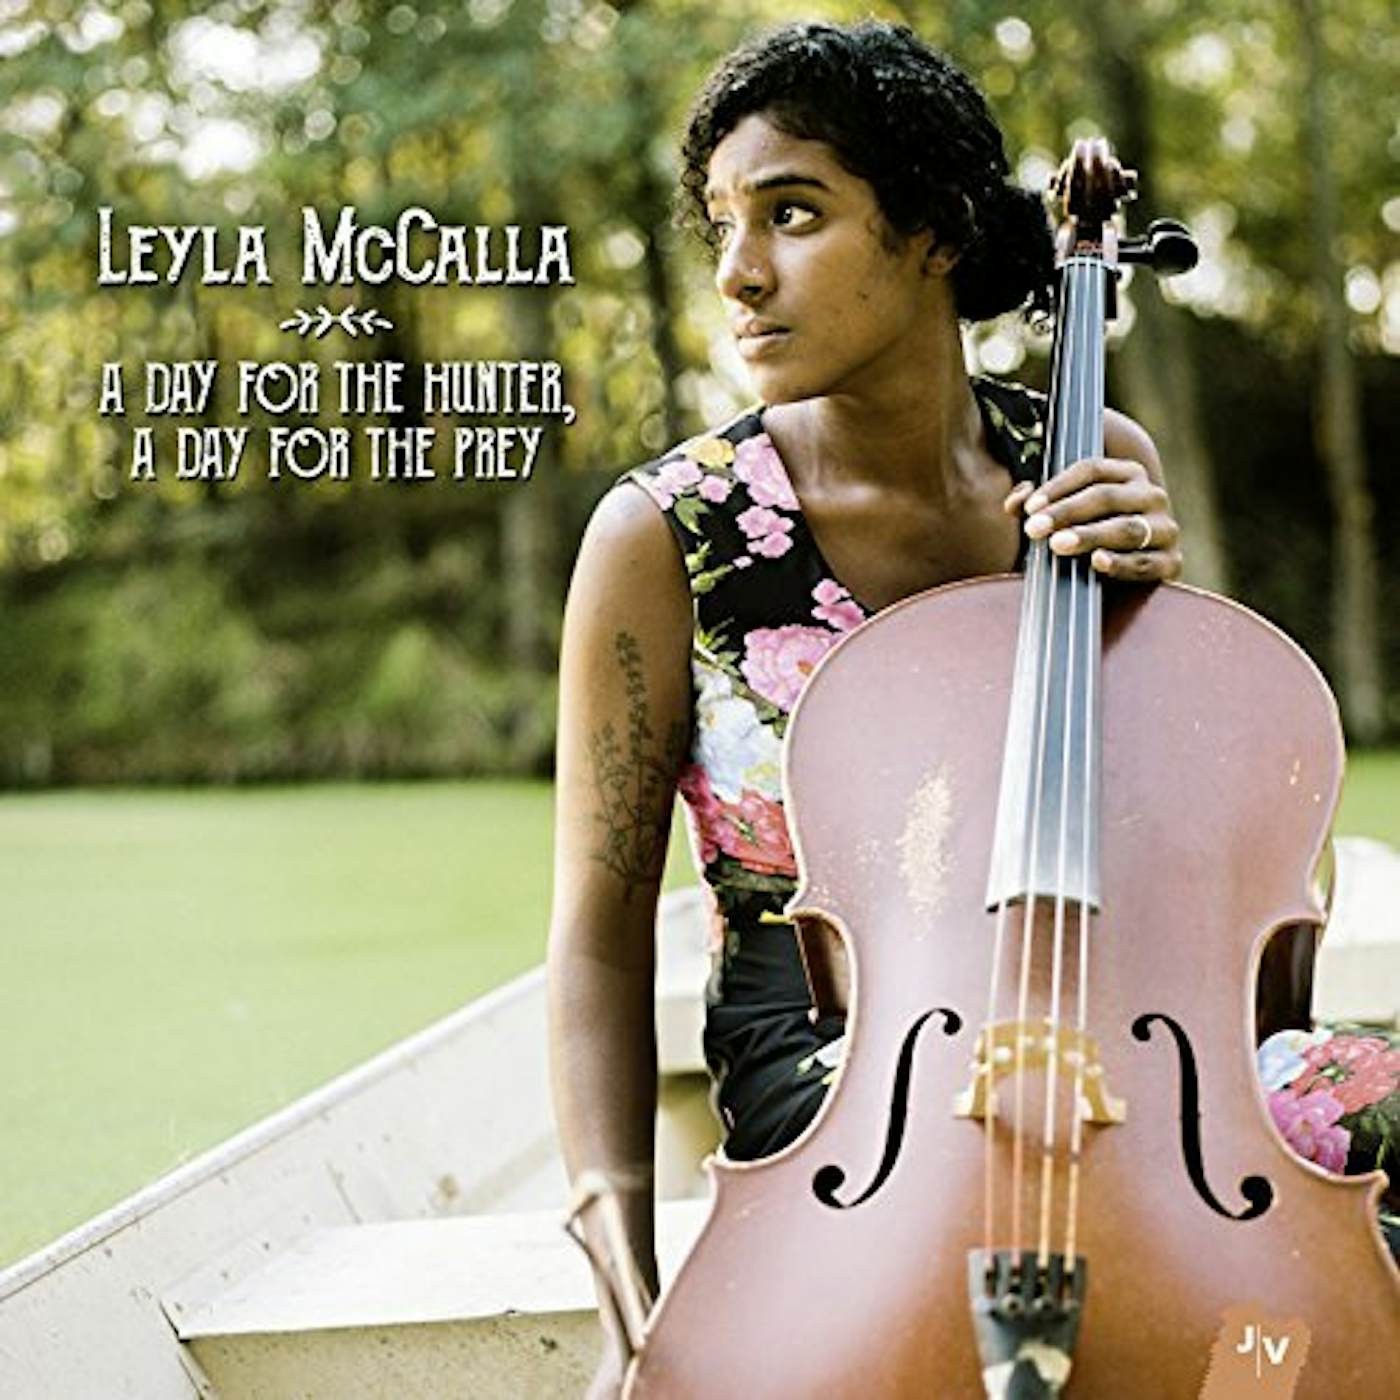 Leyla McCalla DAY FOR THE HUNTER A DAY FOR THE PREY Vinyl Record